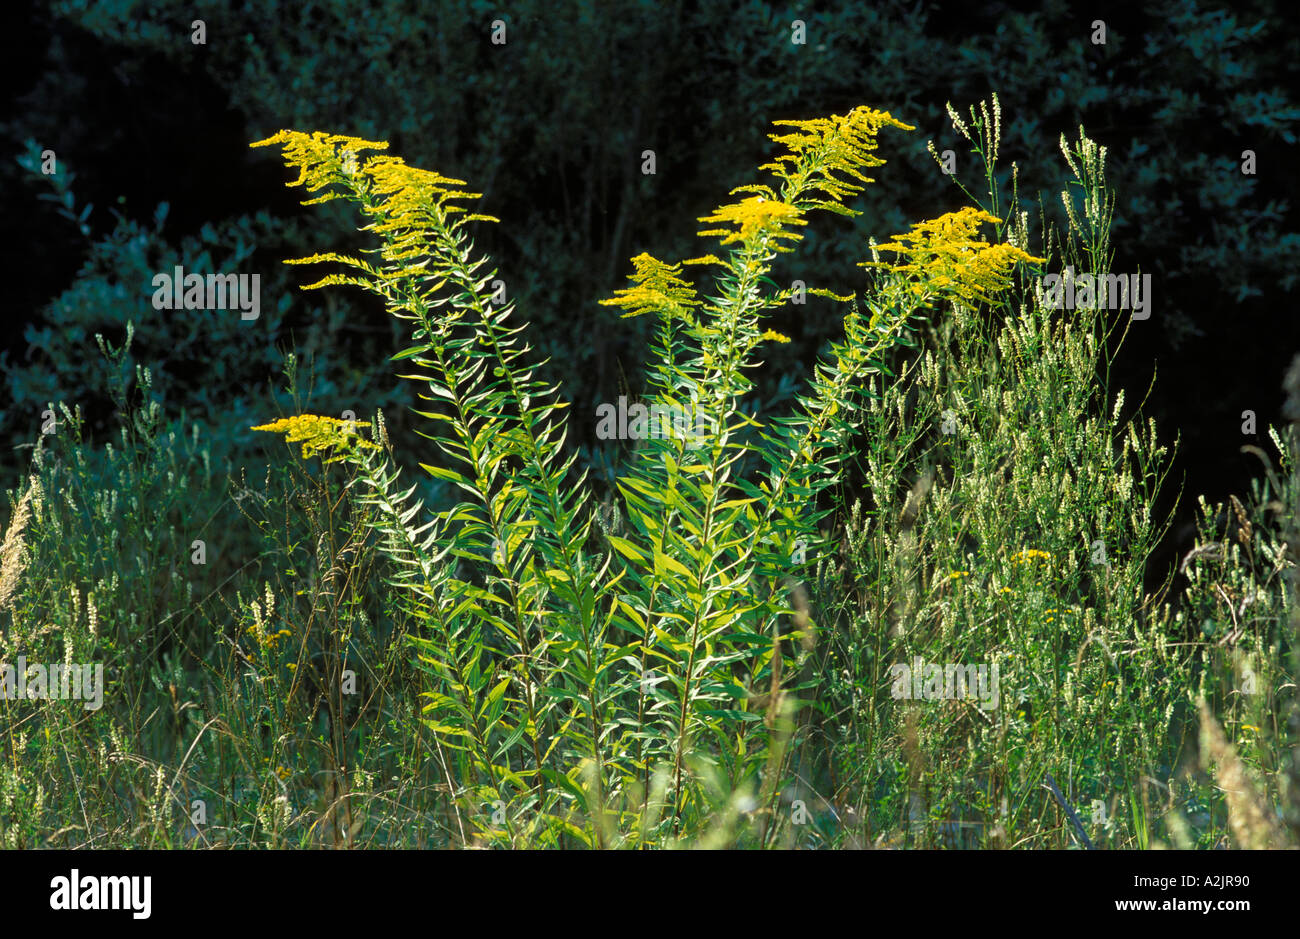 Canadian goldenrod common goldenrod Solidago canadensis Germany Stock Photo